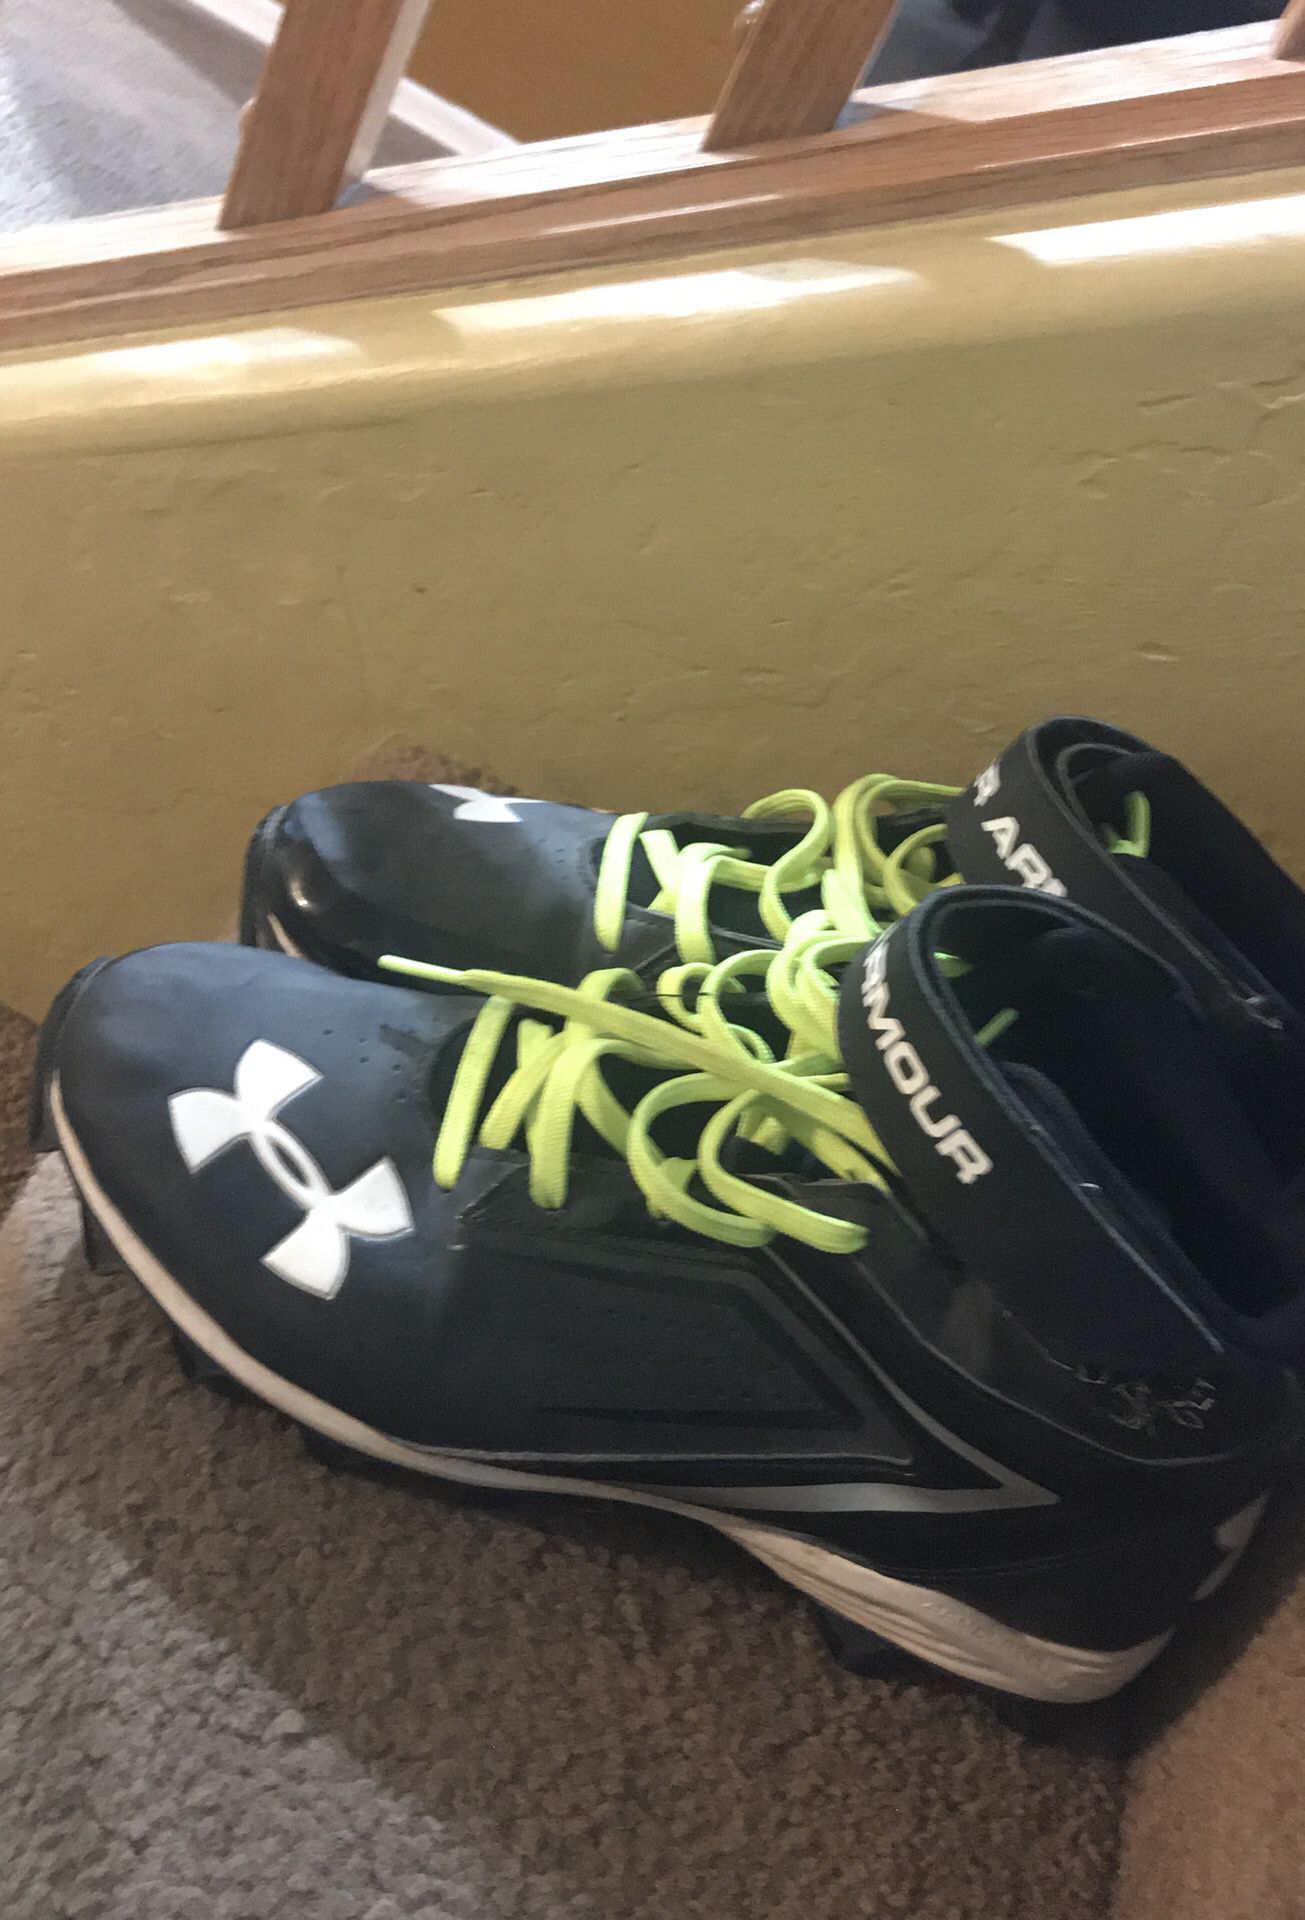 Under armor cleats for sale barely used don’t smell